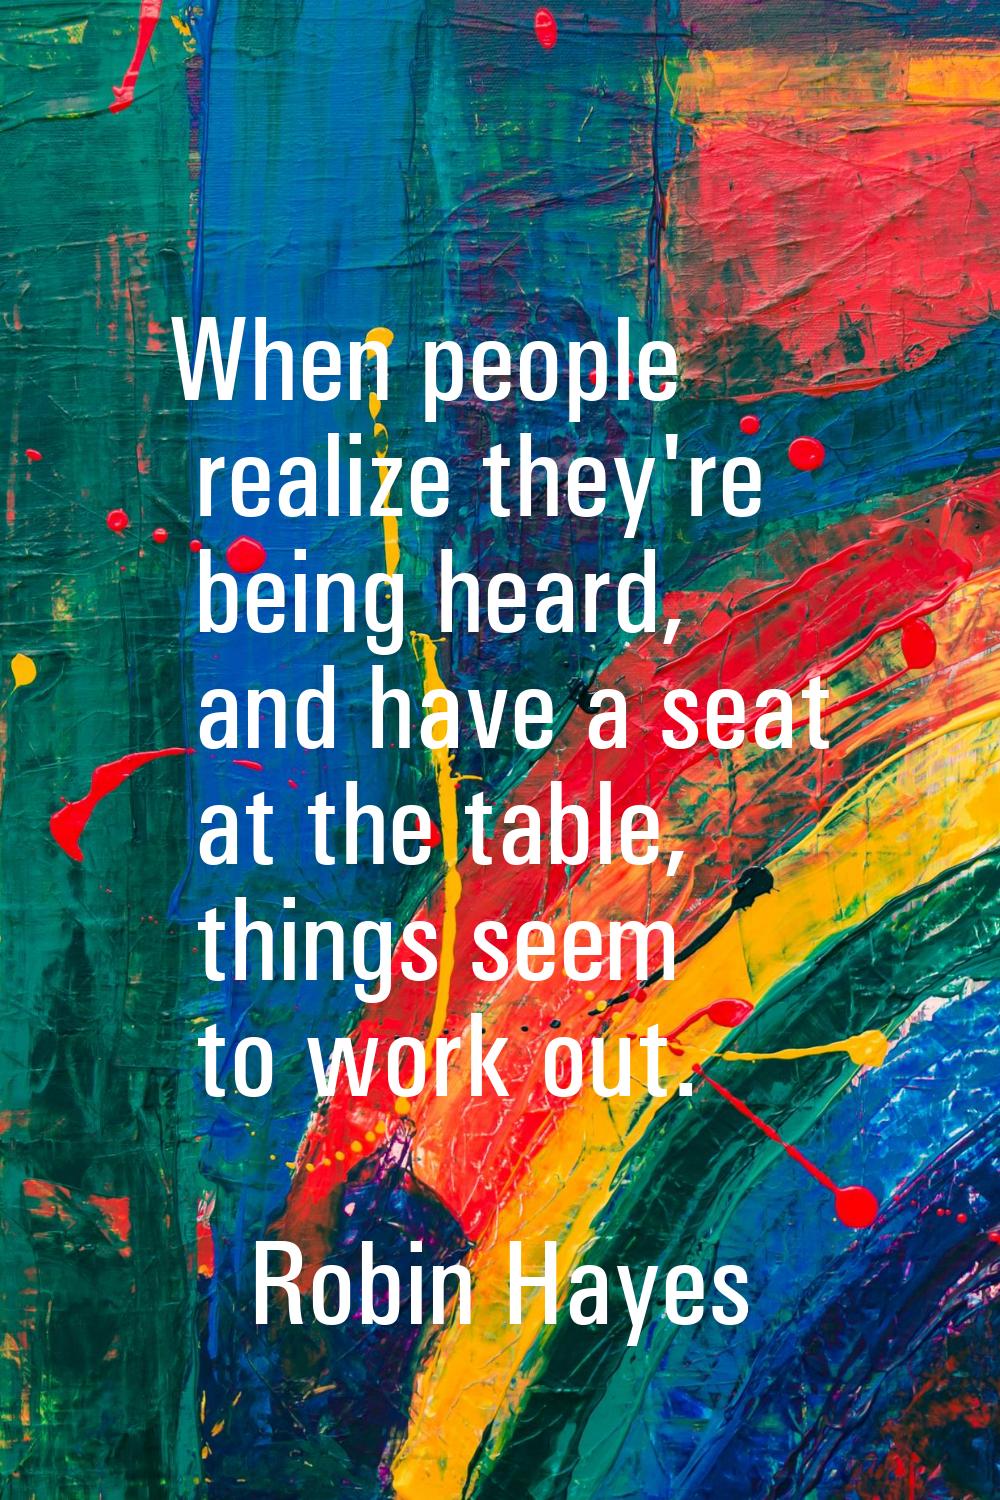 When people realize they're being heard, and have a seat at the table, things seem to work out.